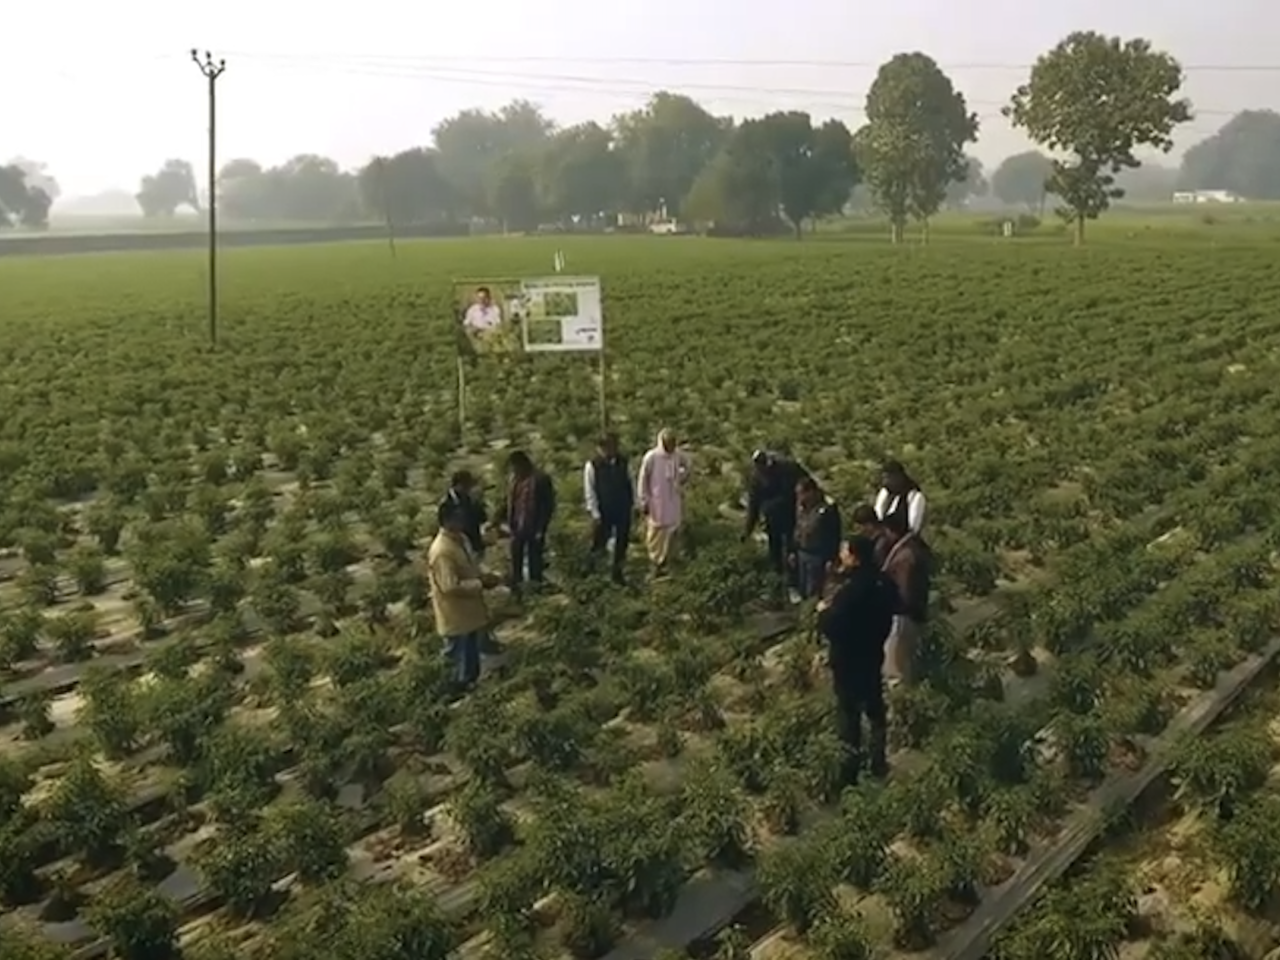 People stood near a sign in a field